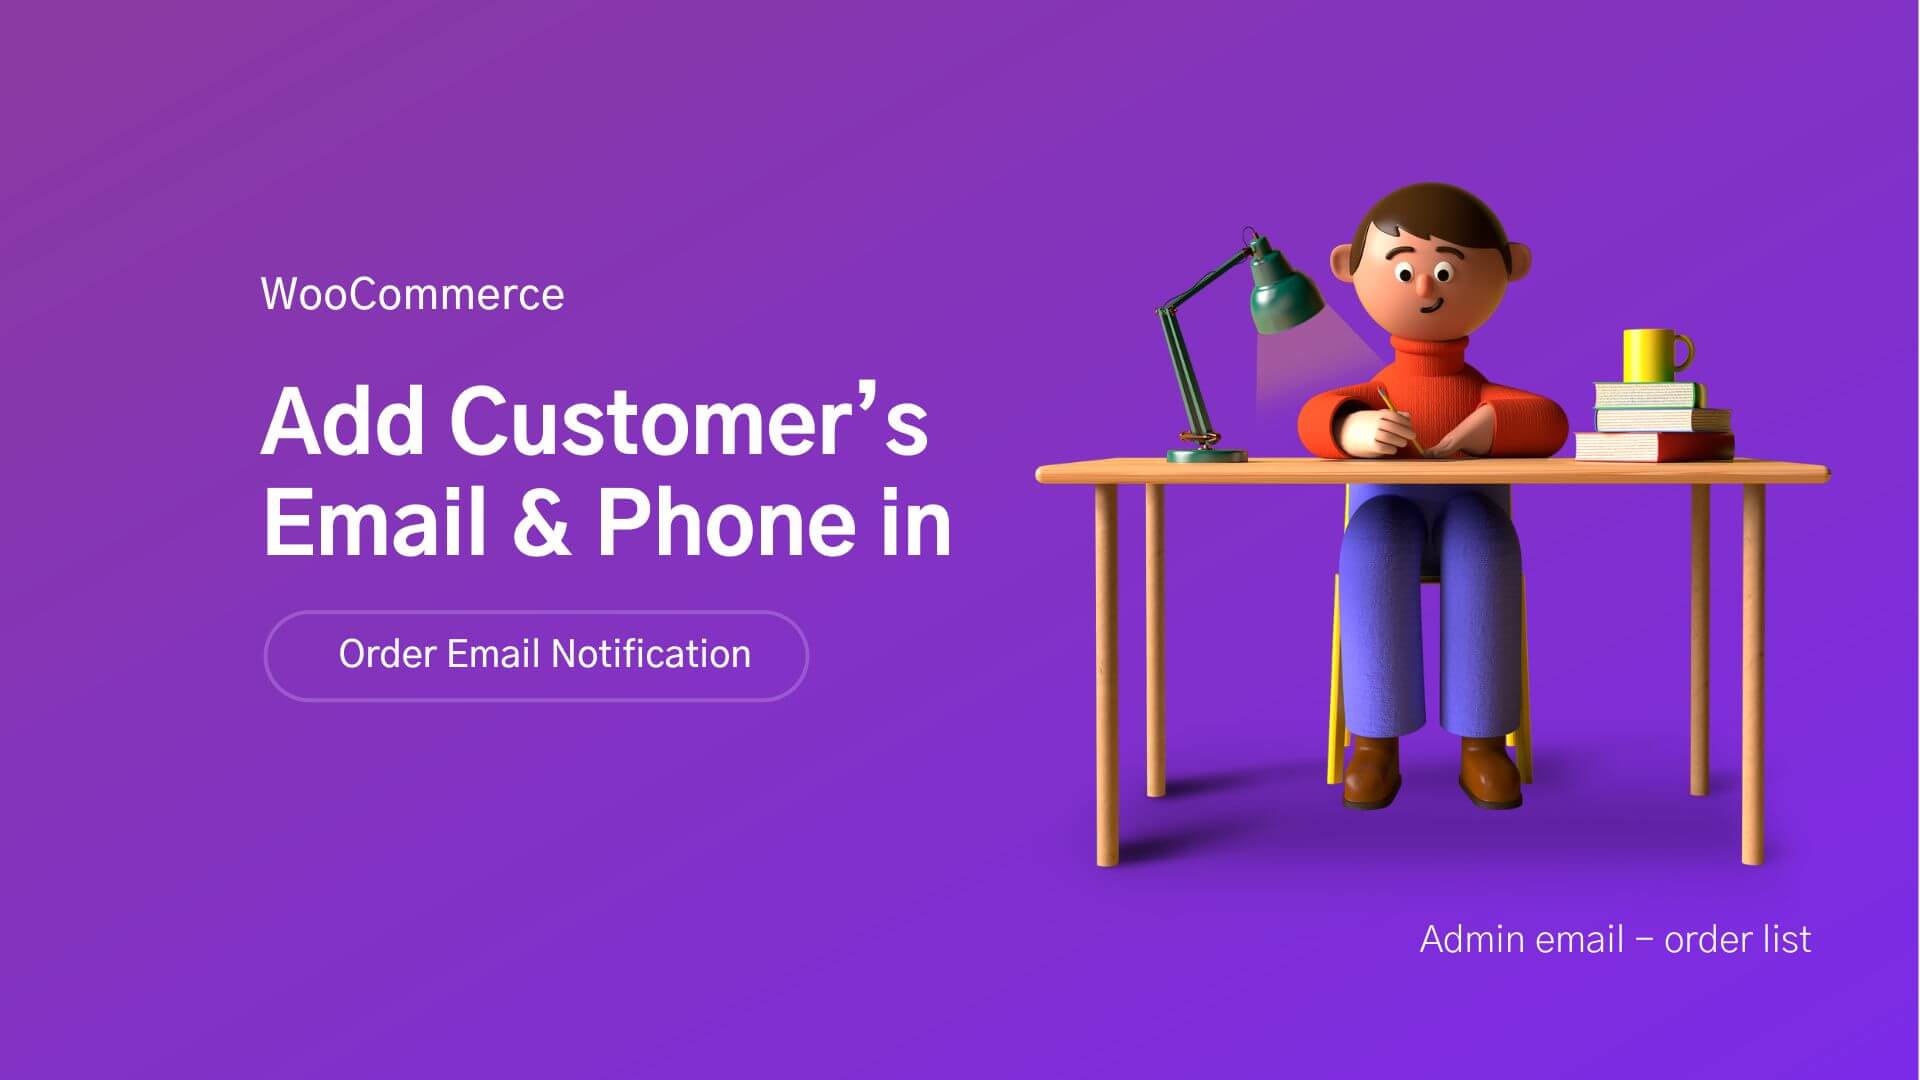 How to add customer email and phone in order email of WooCommerce